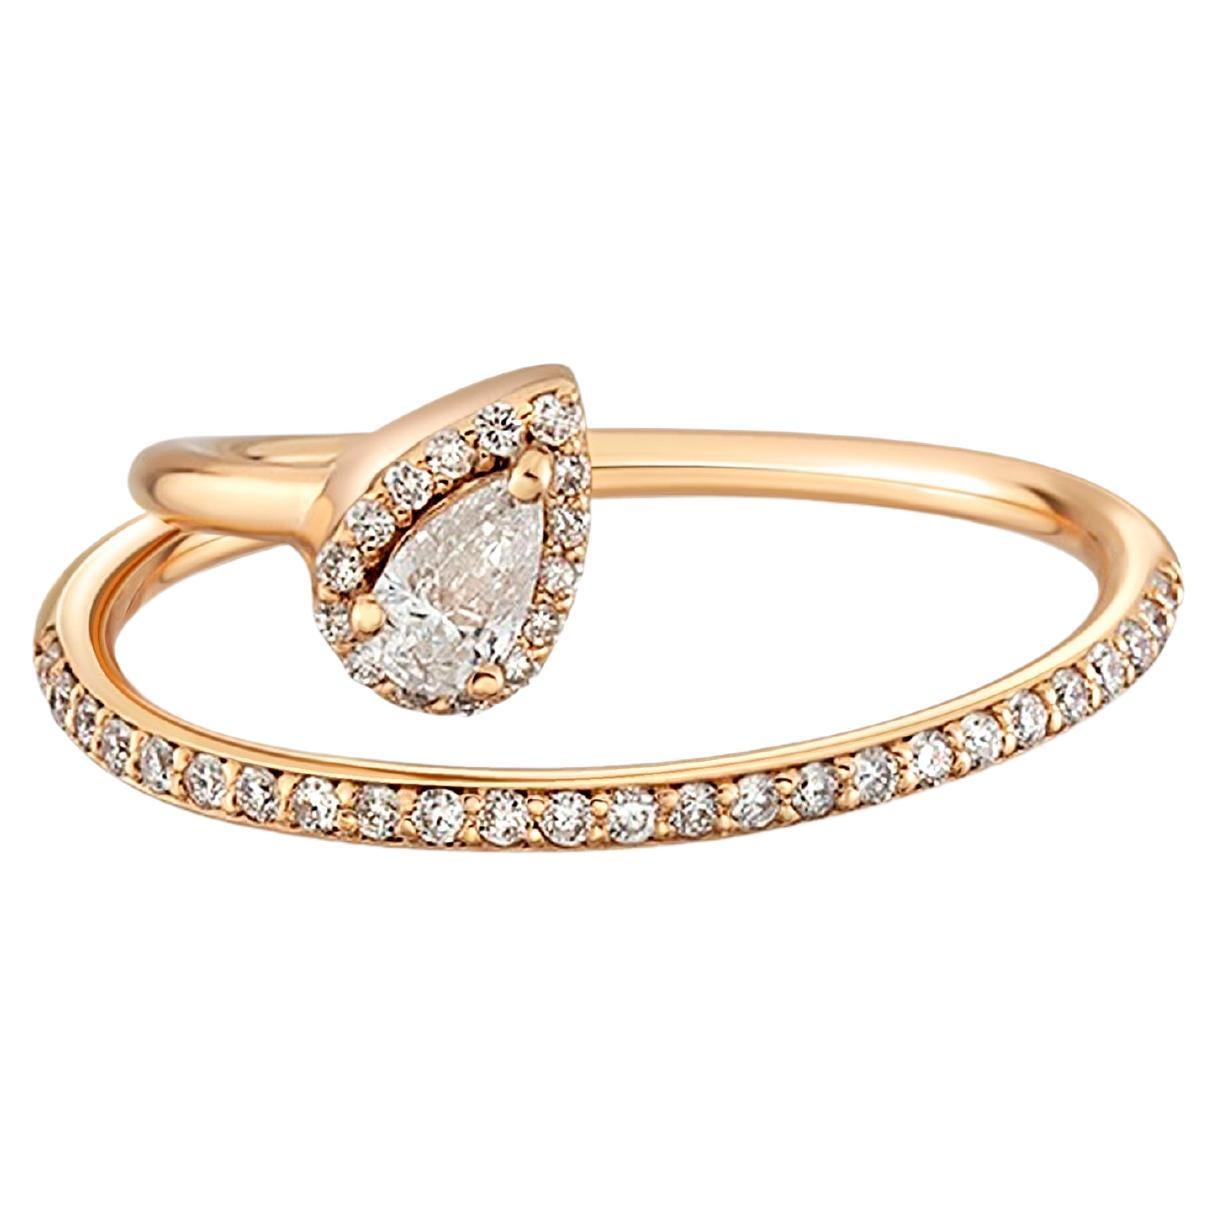 What is a double band ring?